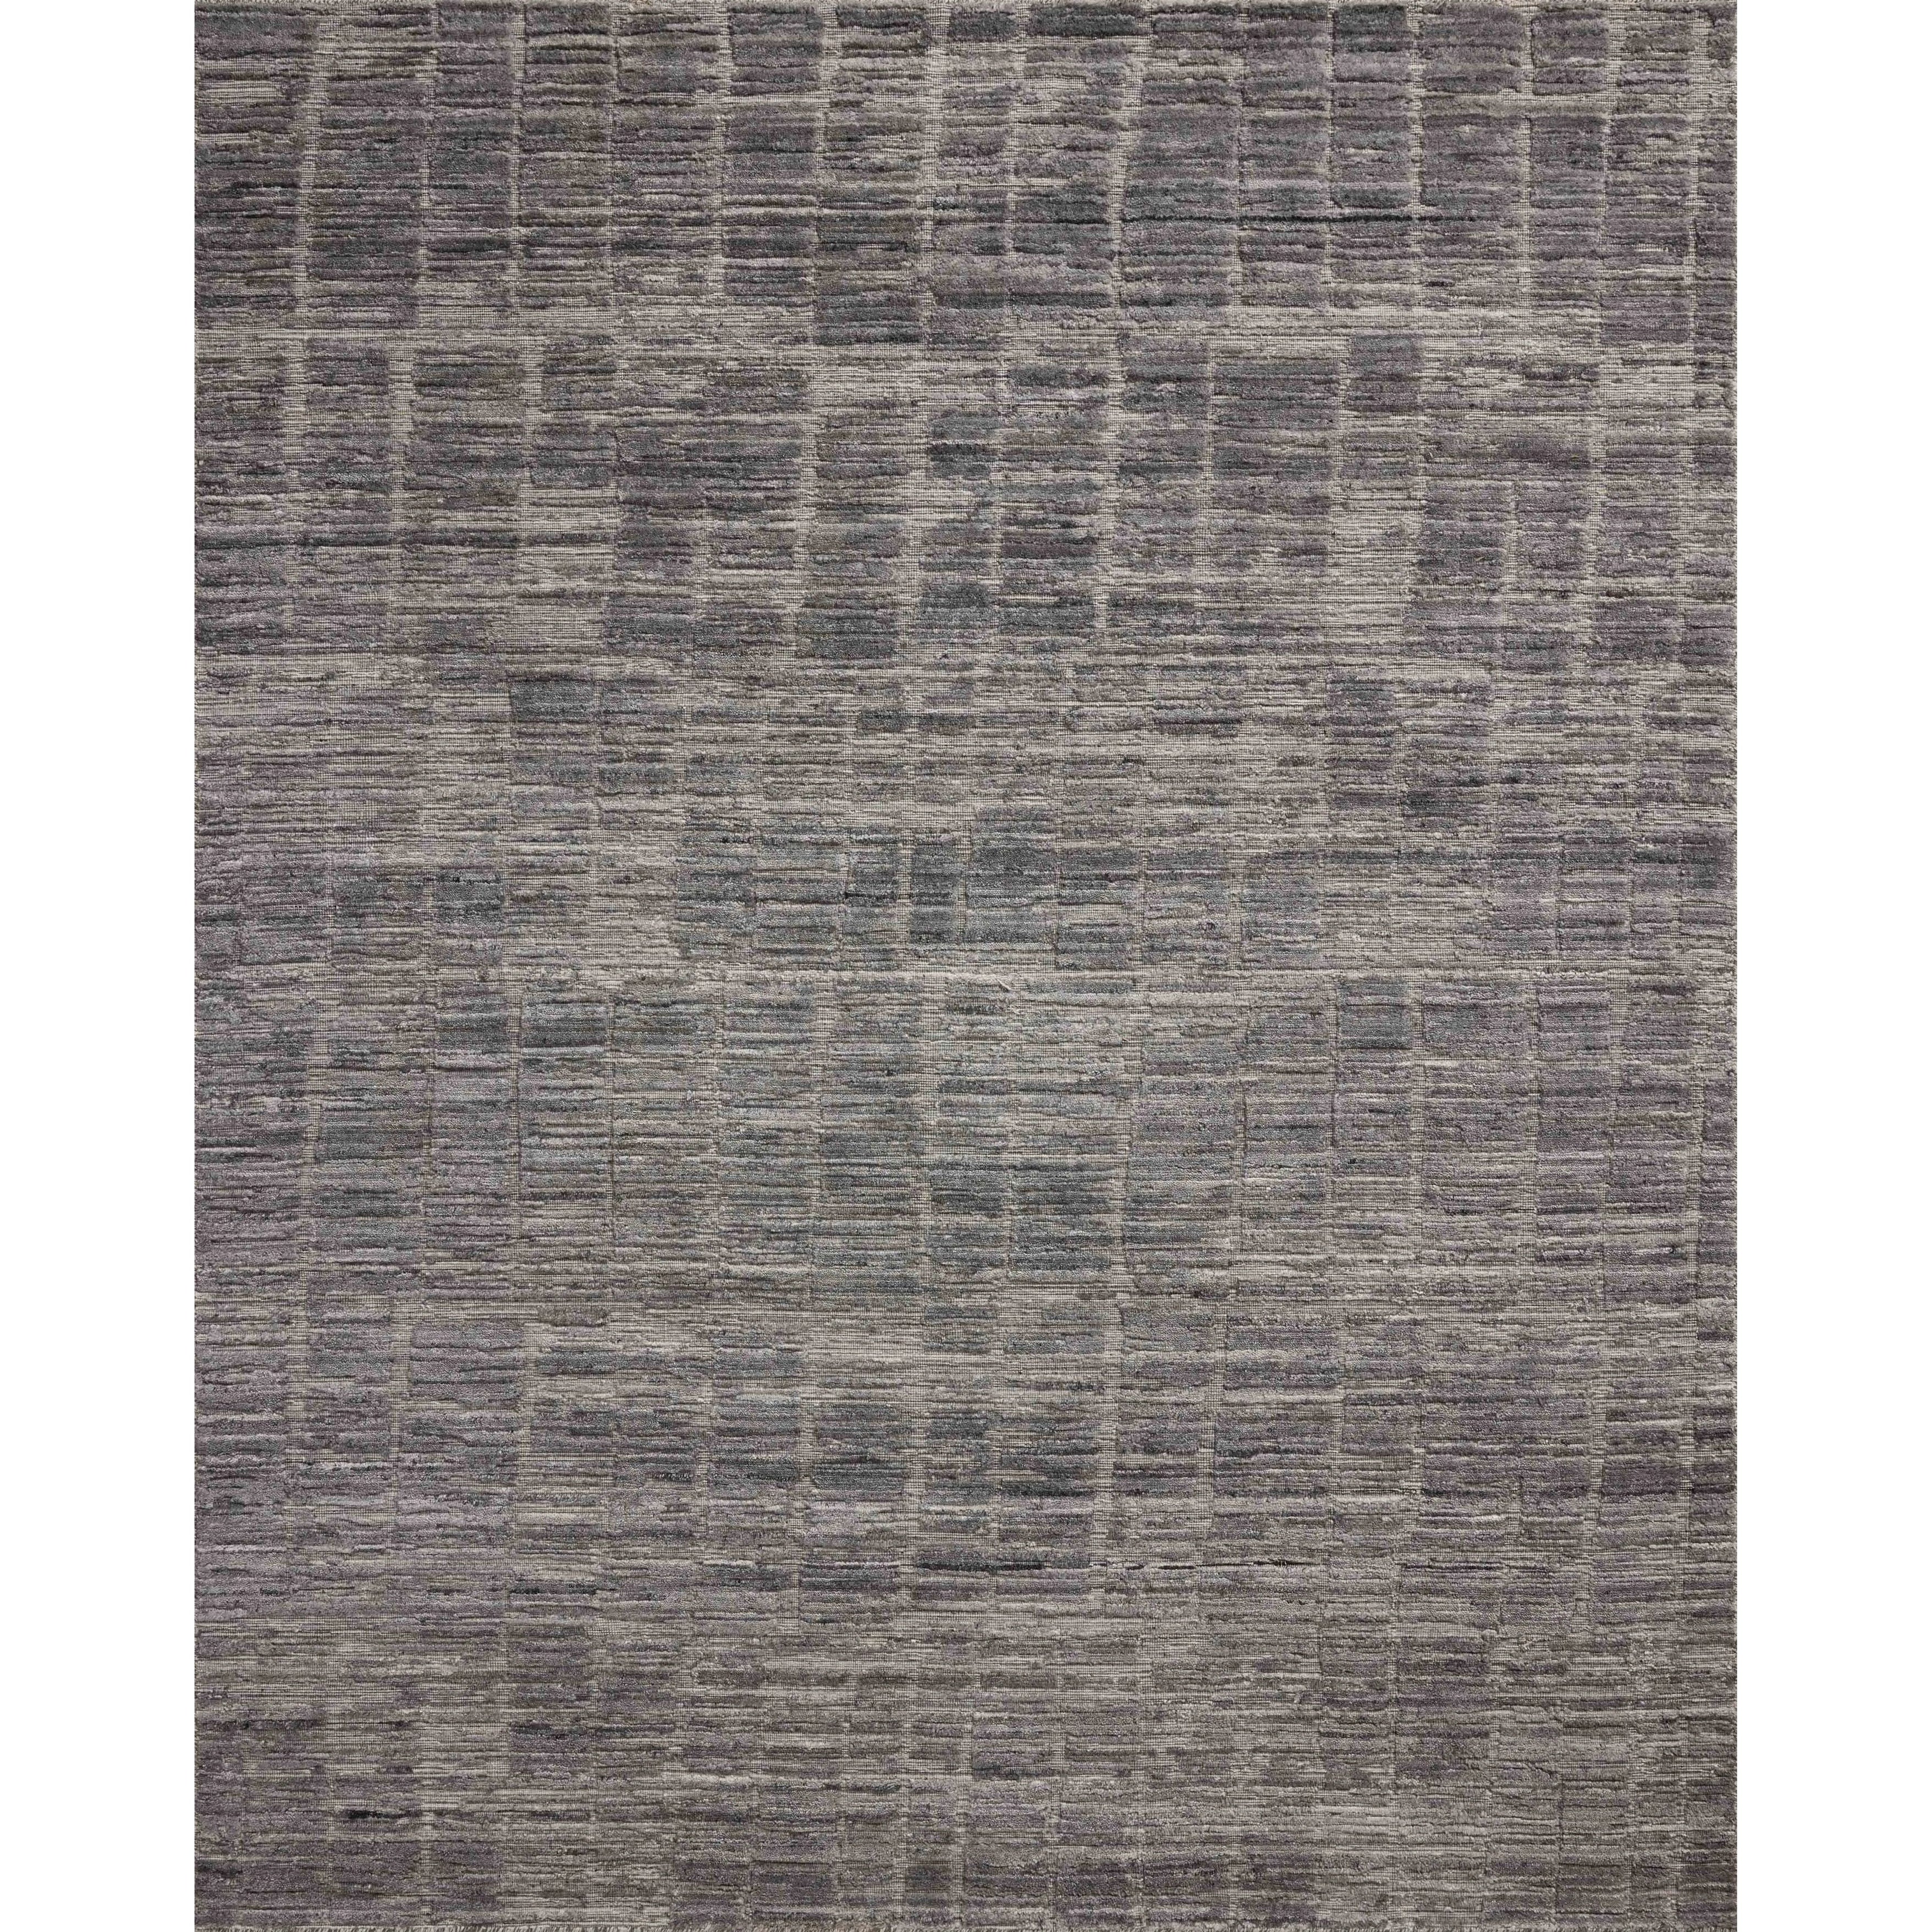 Area rugs in the Daniel Slate Rug have a graphic design in a range of tonal palettes with a soft, gently ribbed texture. The hand-loomed pile is a blend of bamboo and wool with a slight sheen that captures the light and changes the rug’s sense of depth throughout the day. Amethyst Home provides interior design, new home construction design consulting, vintage area rugs, and lighting in the Park City metro area.